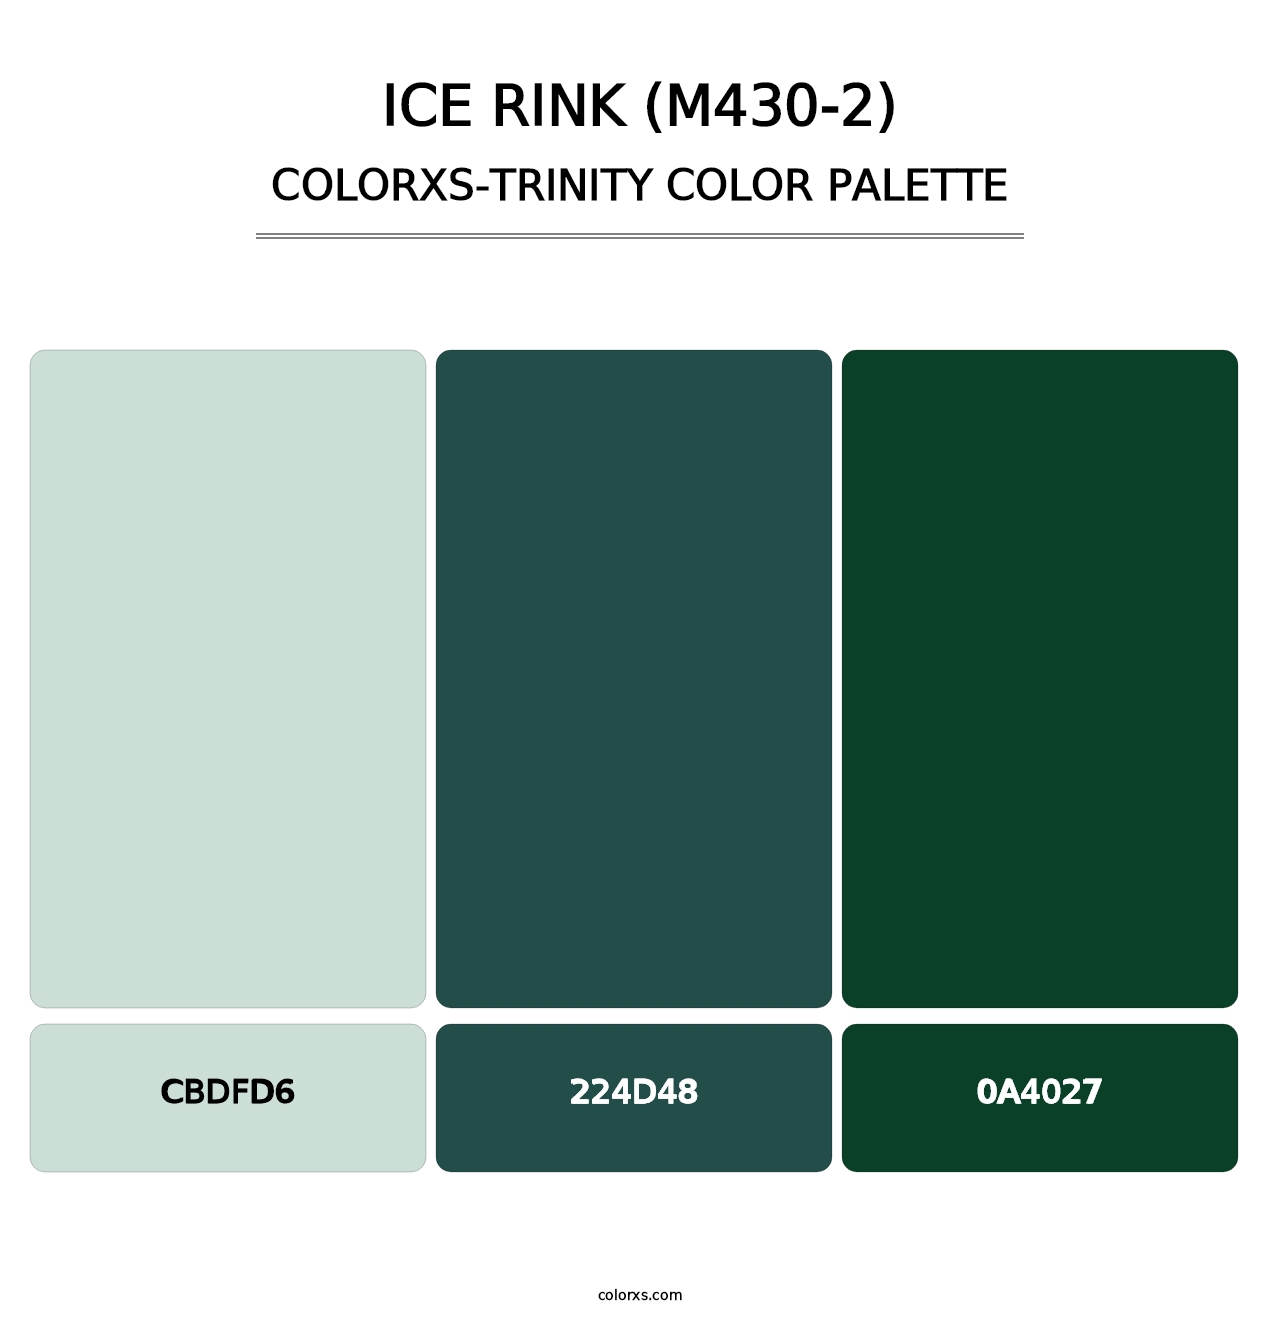 Ice Rink (M430-2) - Colorxs Trinity Palette